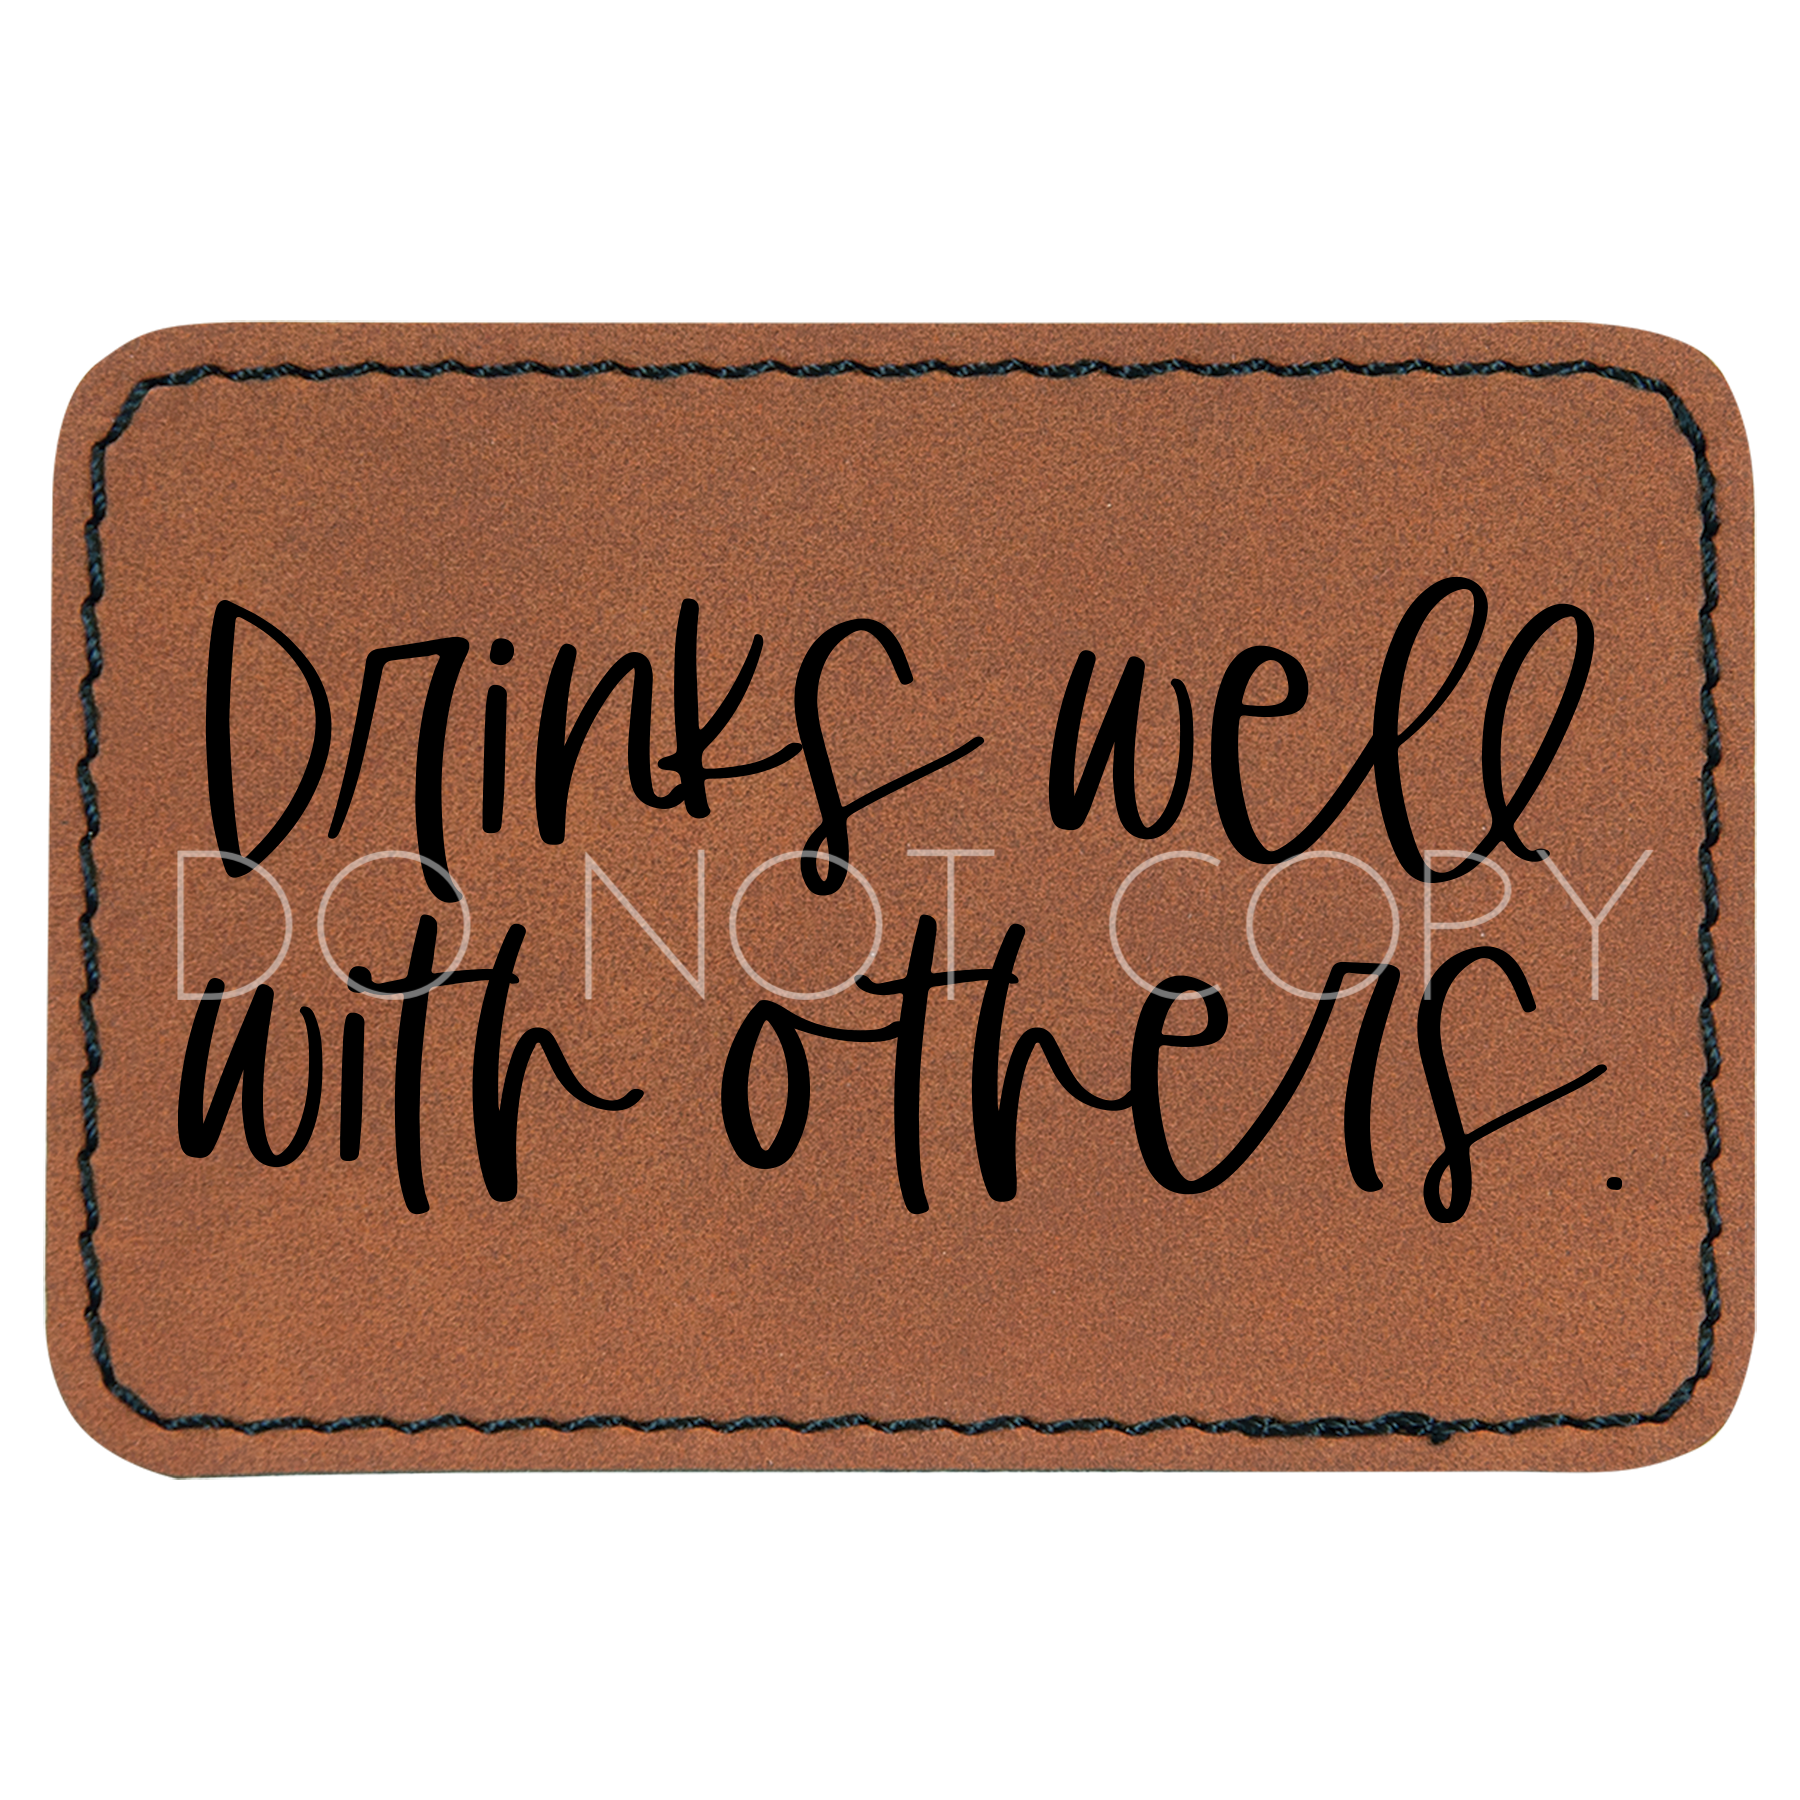 Drinks Well With Others Patch